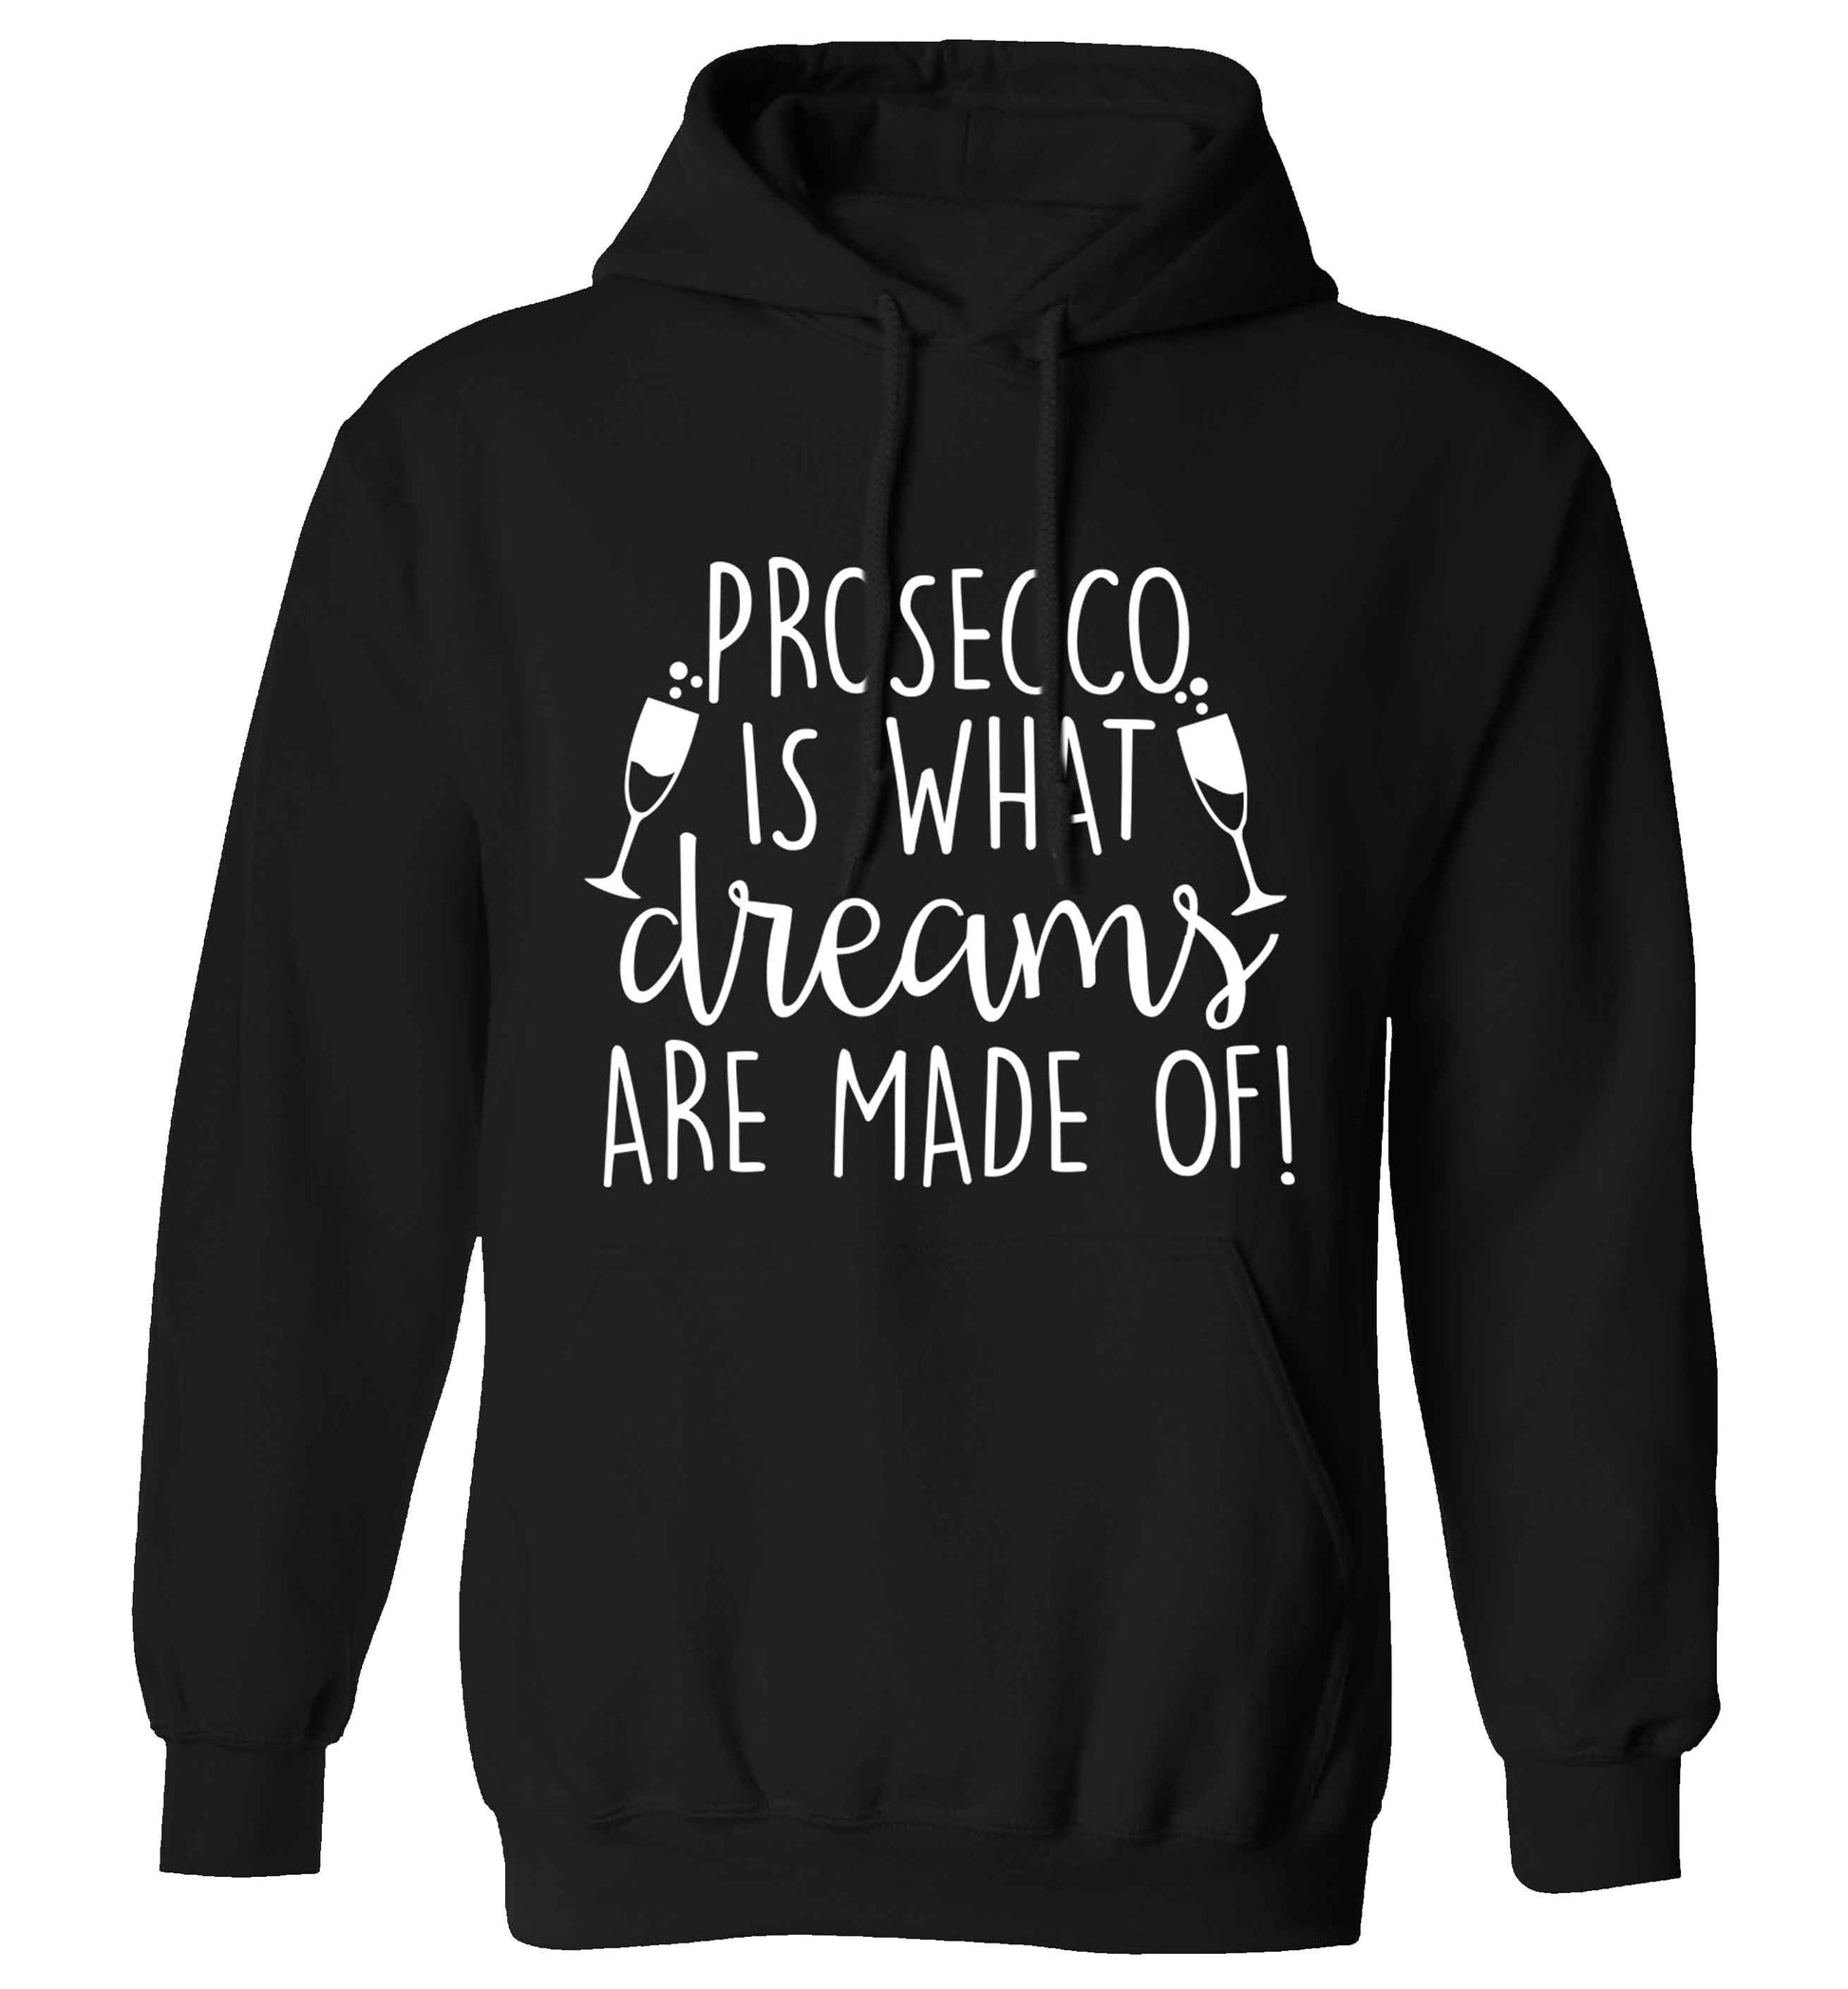 Prosecco is what dreams are made of adults unisex black hoodie 2XL